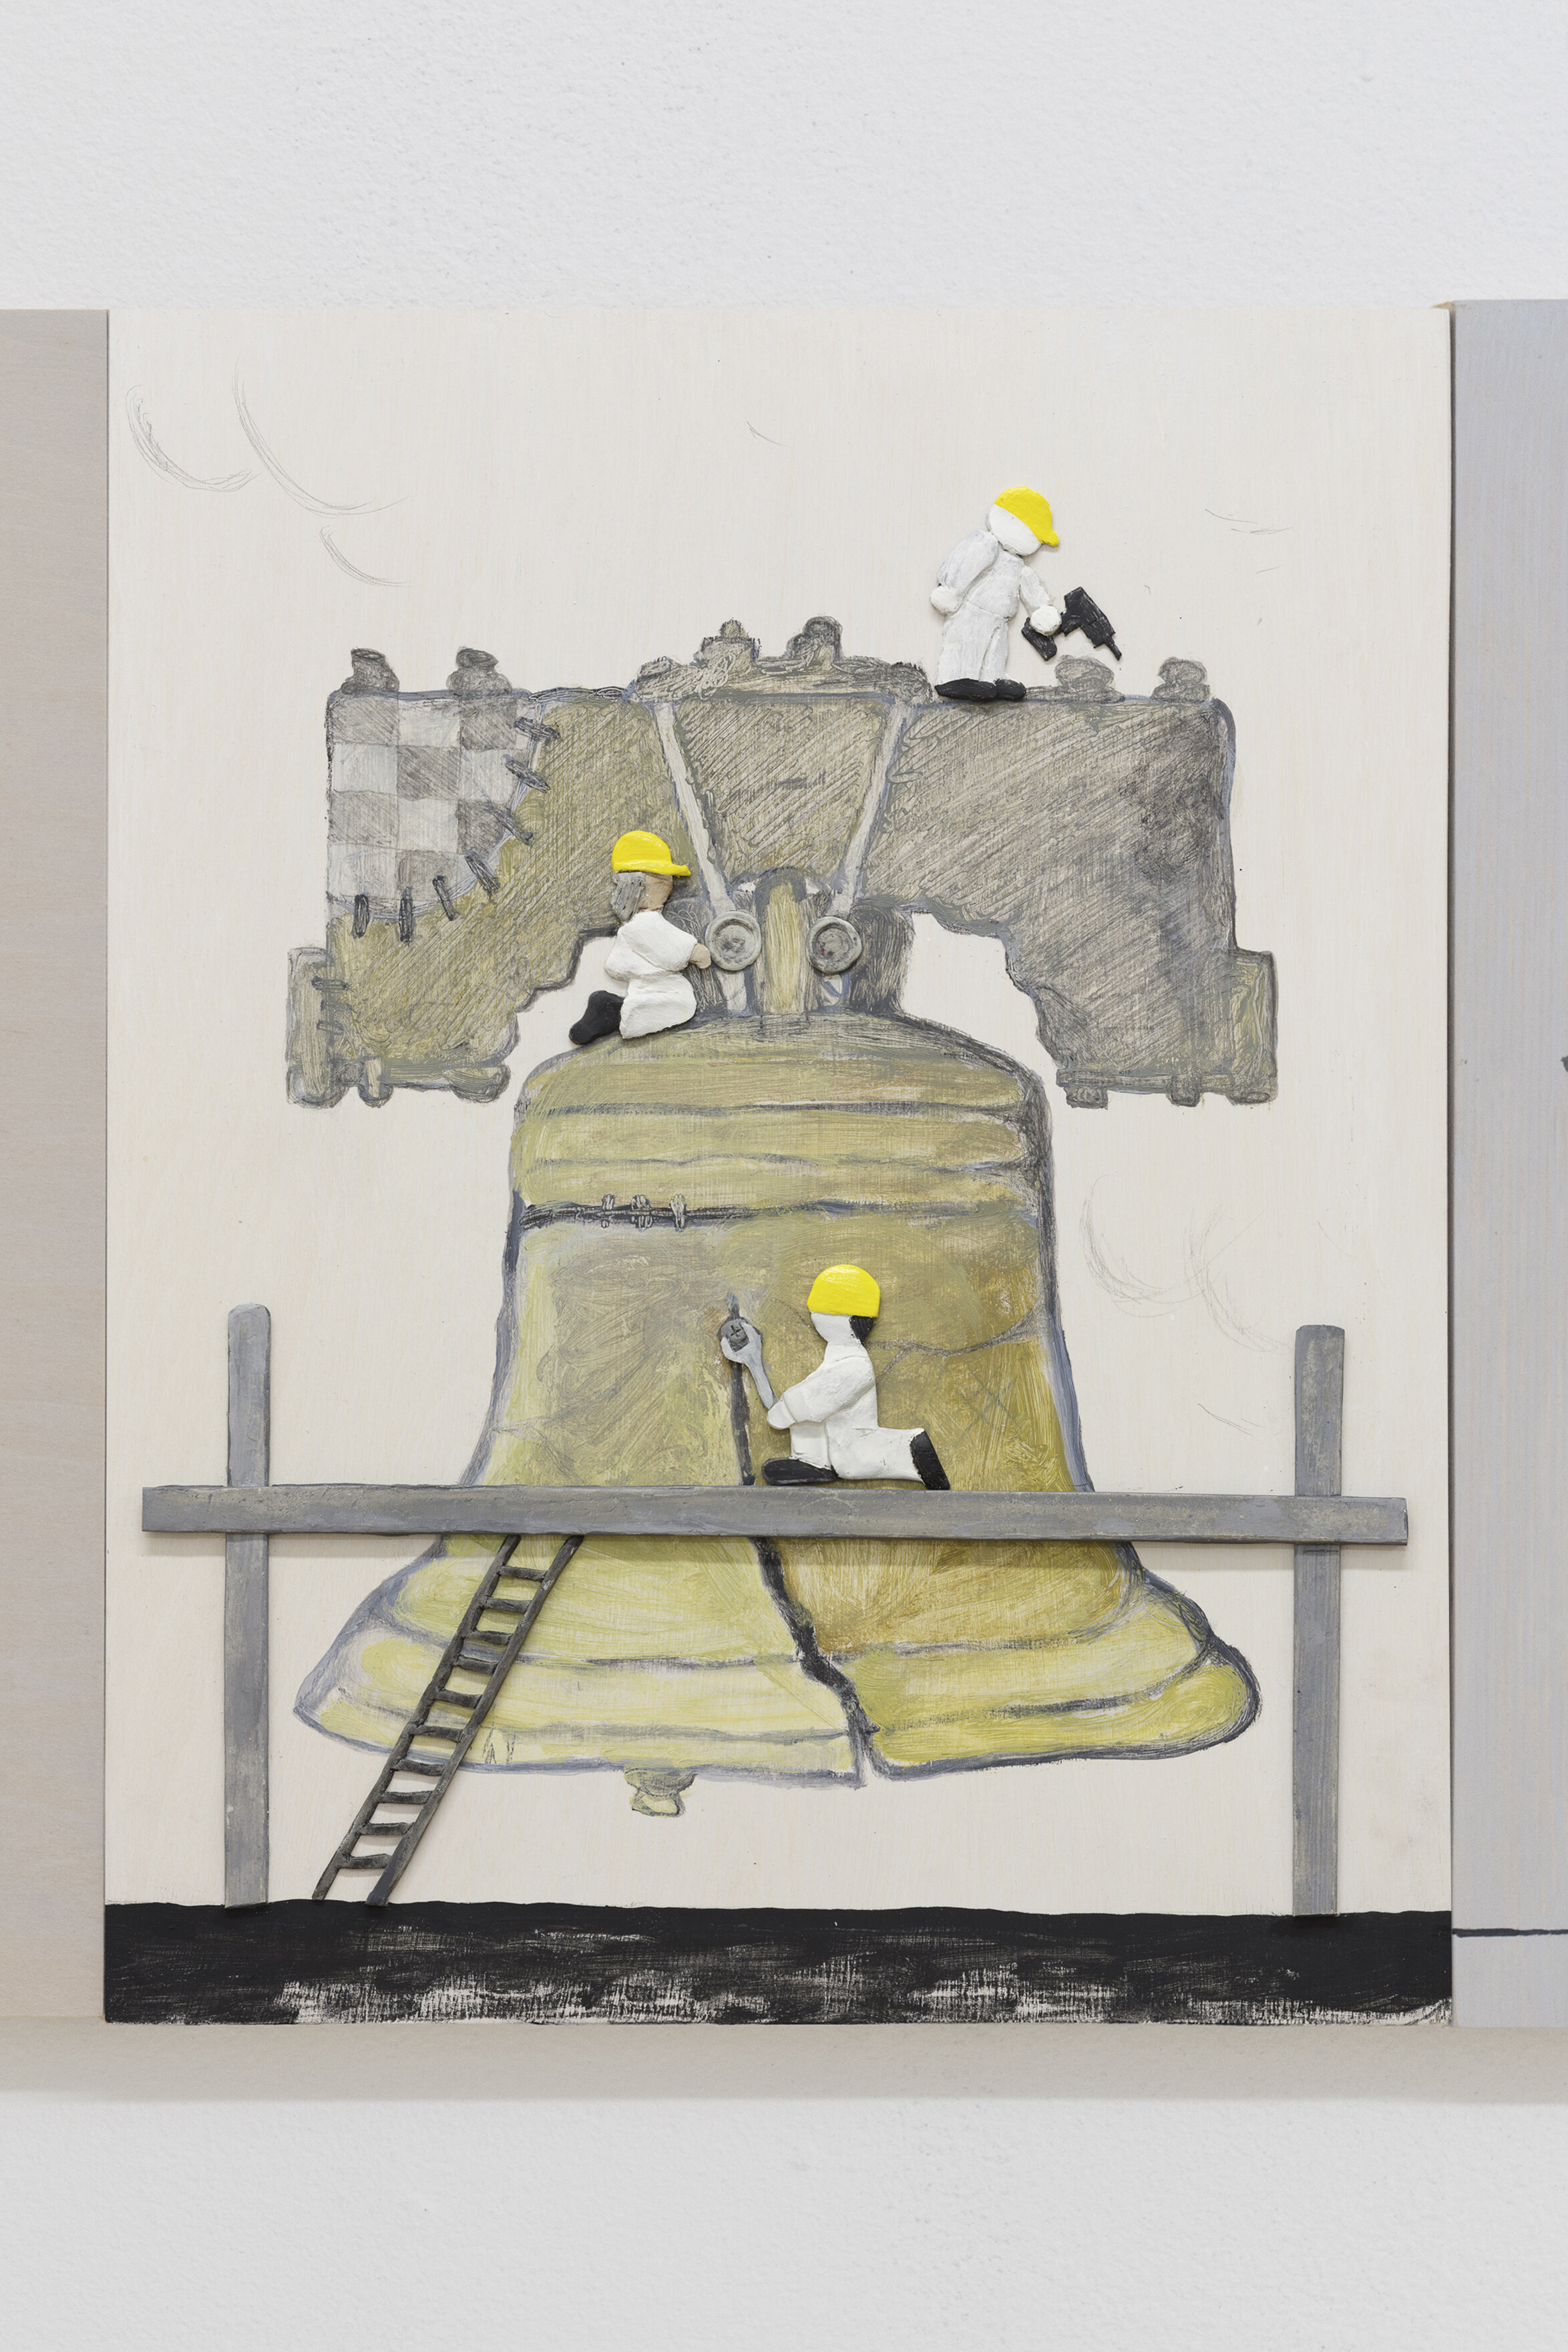  Dennis Witkin  Repairing Bell,  2020 Oil paint, acrylic paint, cal-tint, wood-stain, charcoal, graphite, epoxy clay, polymer clay on panel 14 x 11 inches 